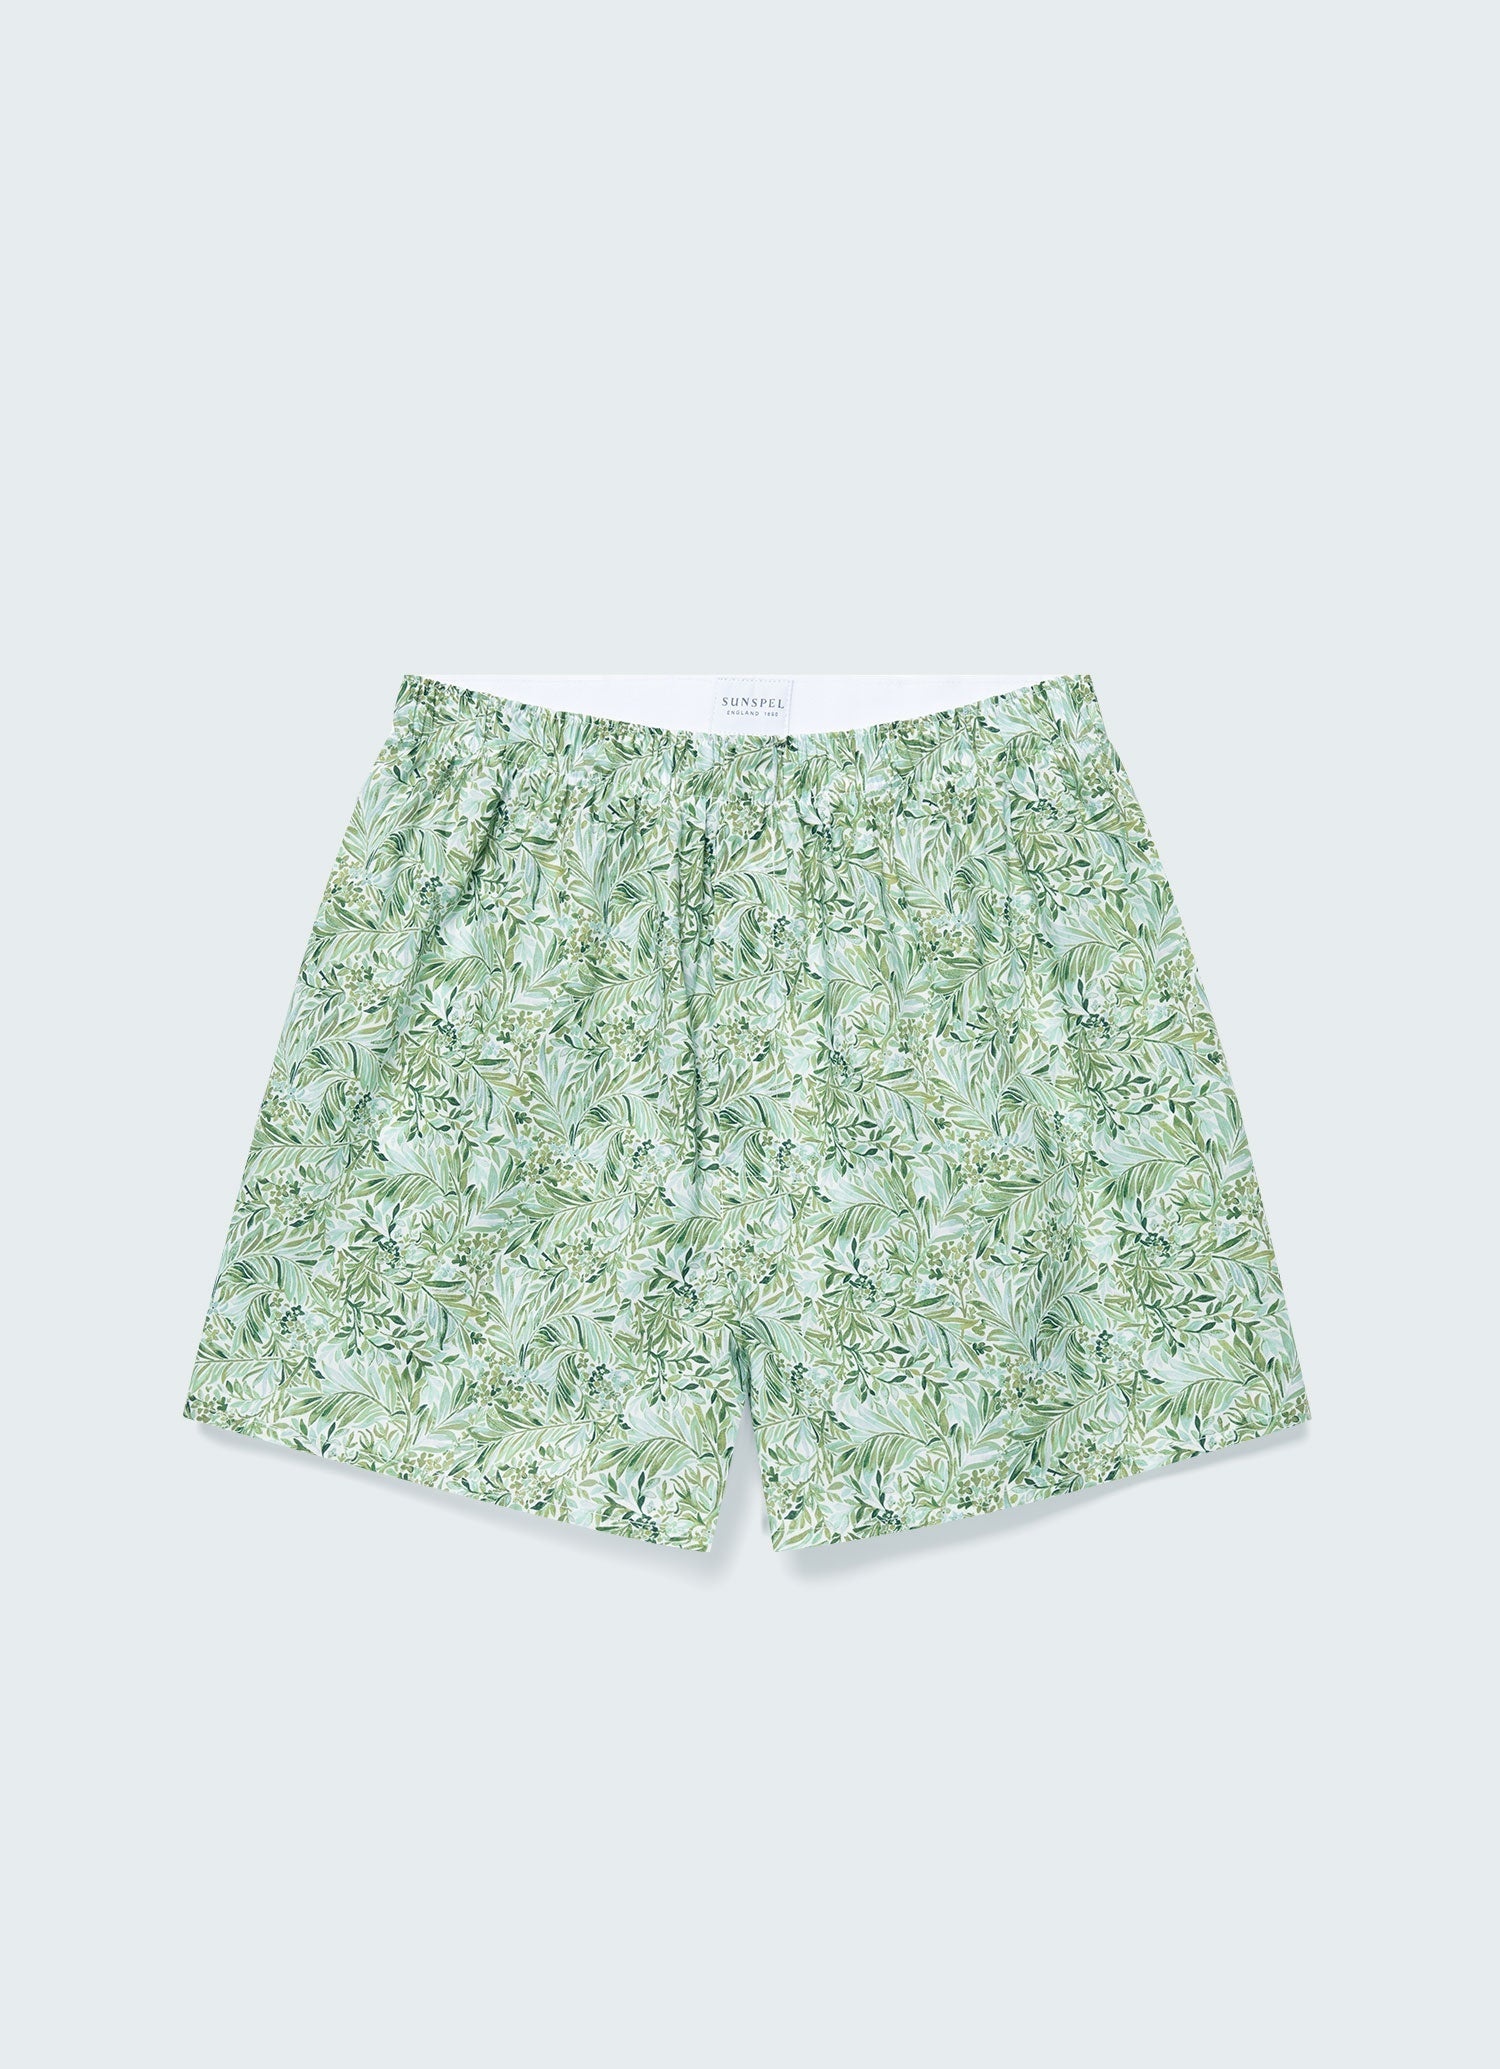 Classic Boxer Shorts in Liberty Fabric - 1